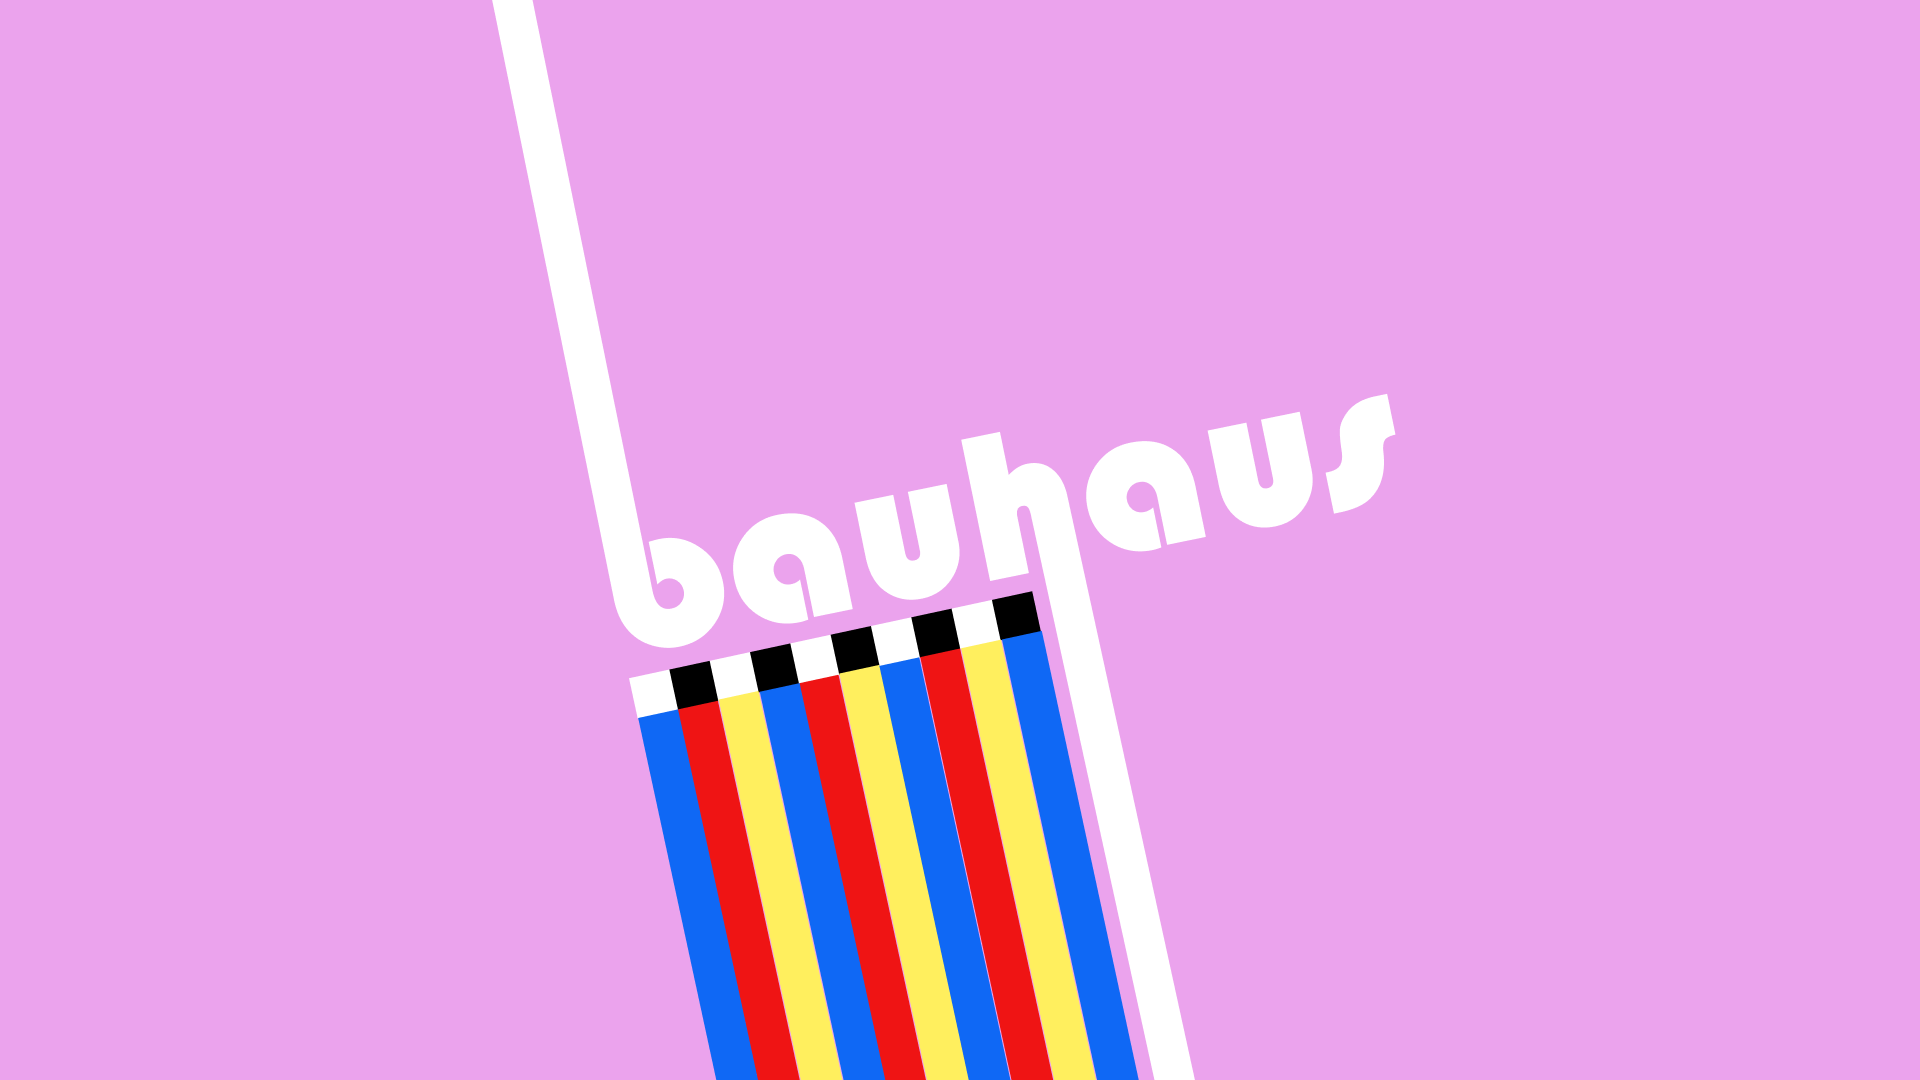 Bauhaus history, style, and famous designers